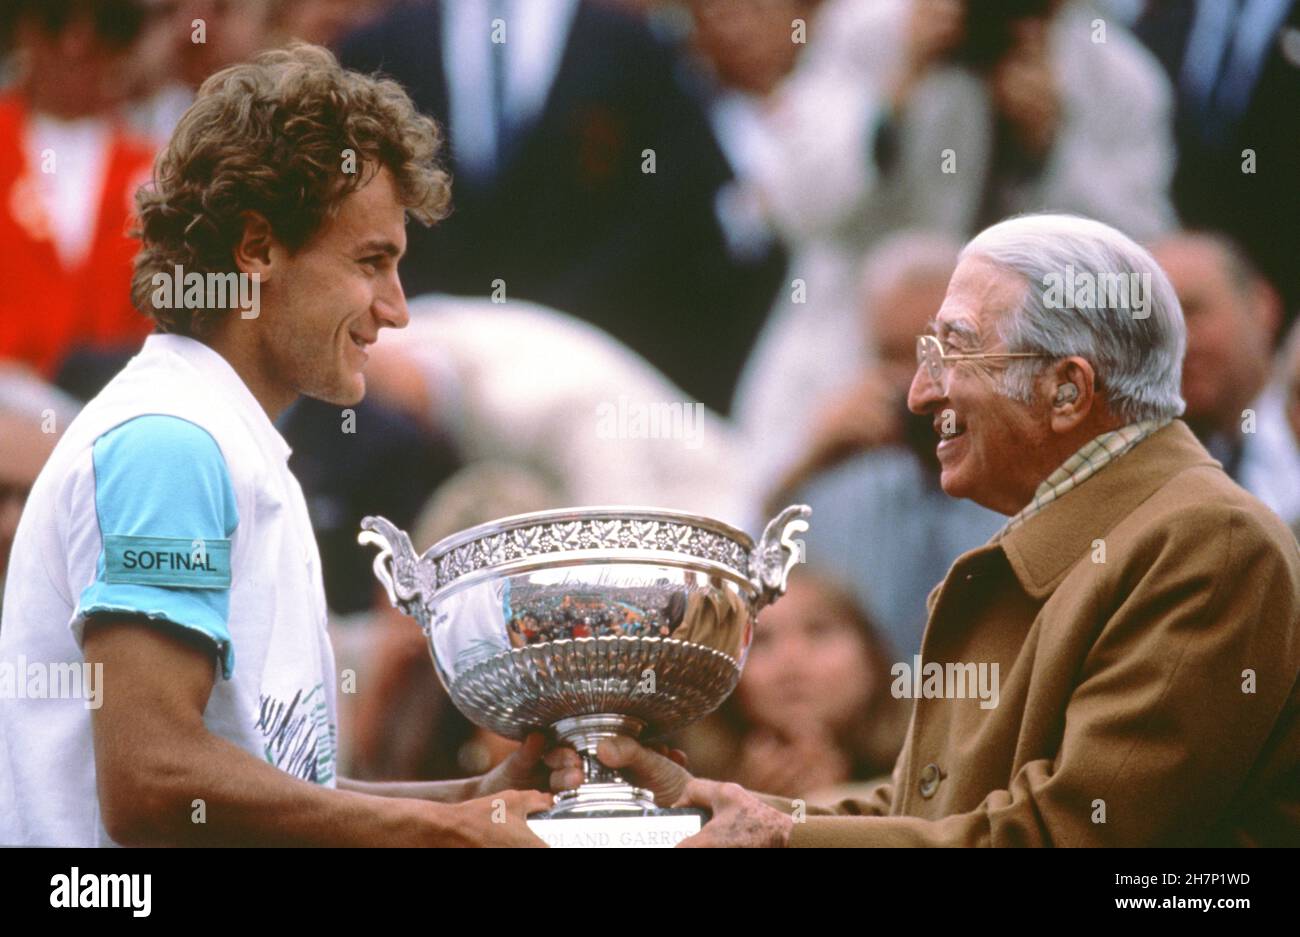 Swedish tennis player Mats Wilander receiving the Coupe des Mousquetaires  from René Lacoste, after his victory in the men's singles final of the  French Open tournament. Paris, Roland Garros, June 5, 1988